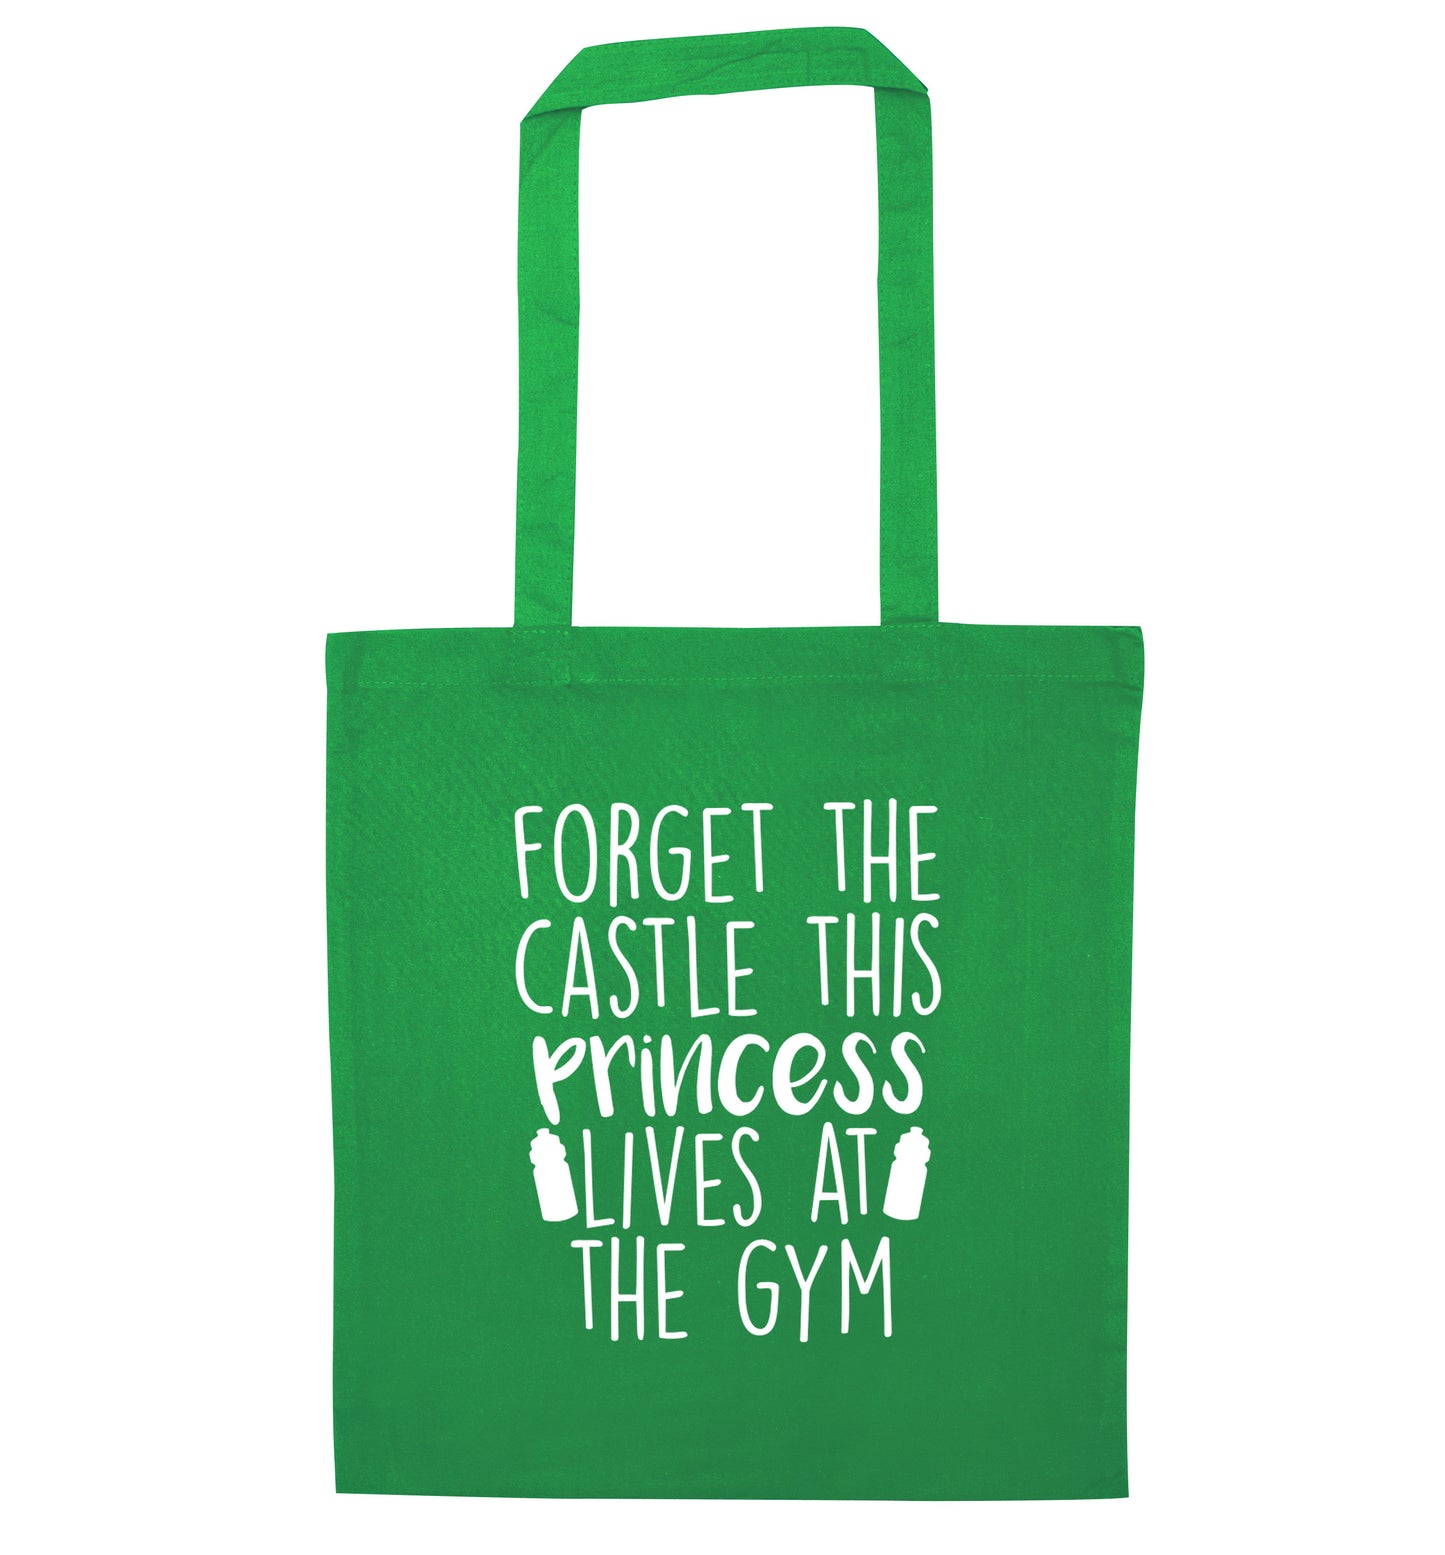 Forget the castle this princess lives at the gym green tote bag